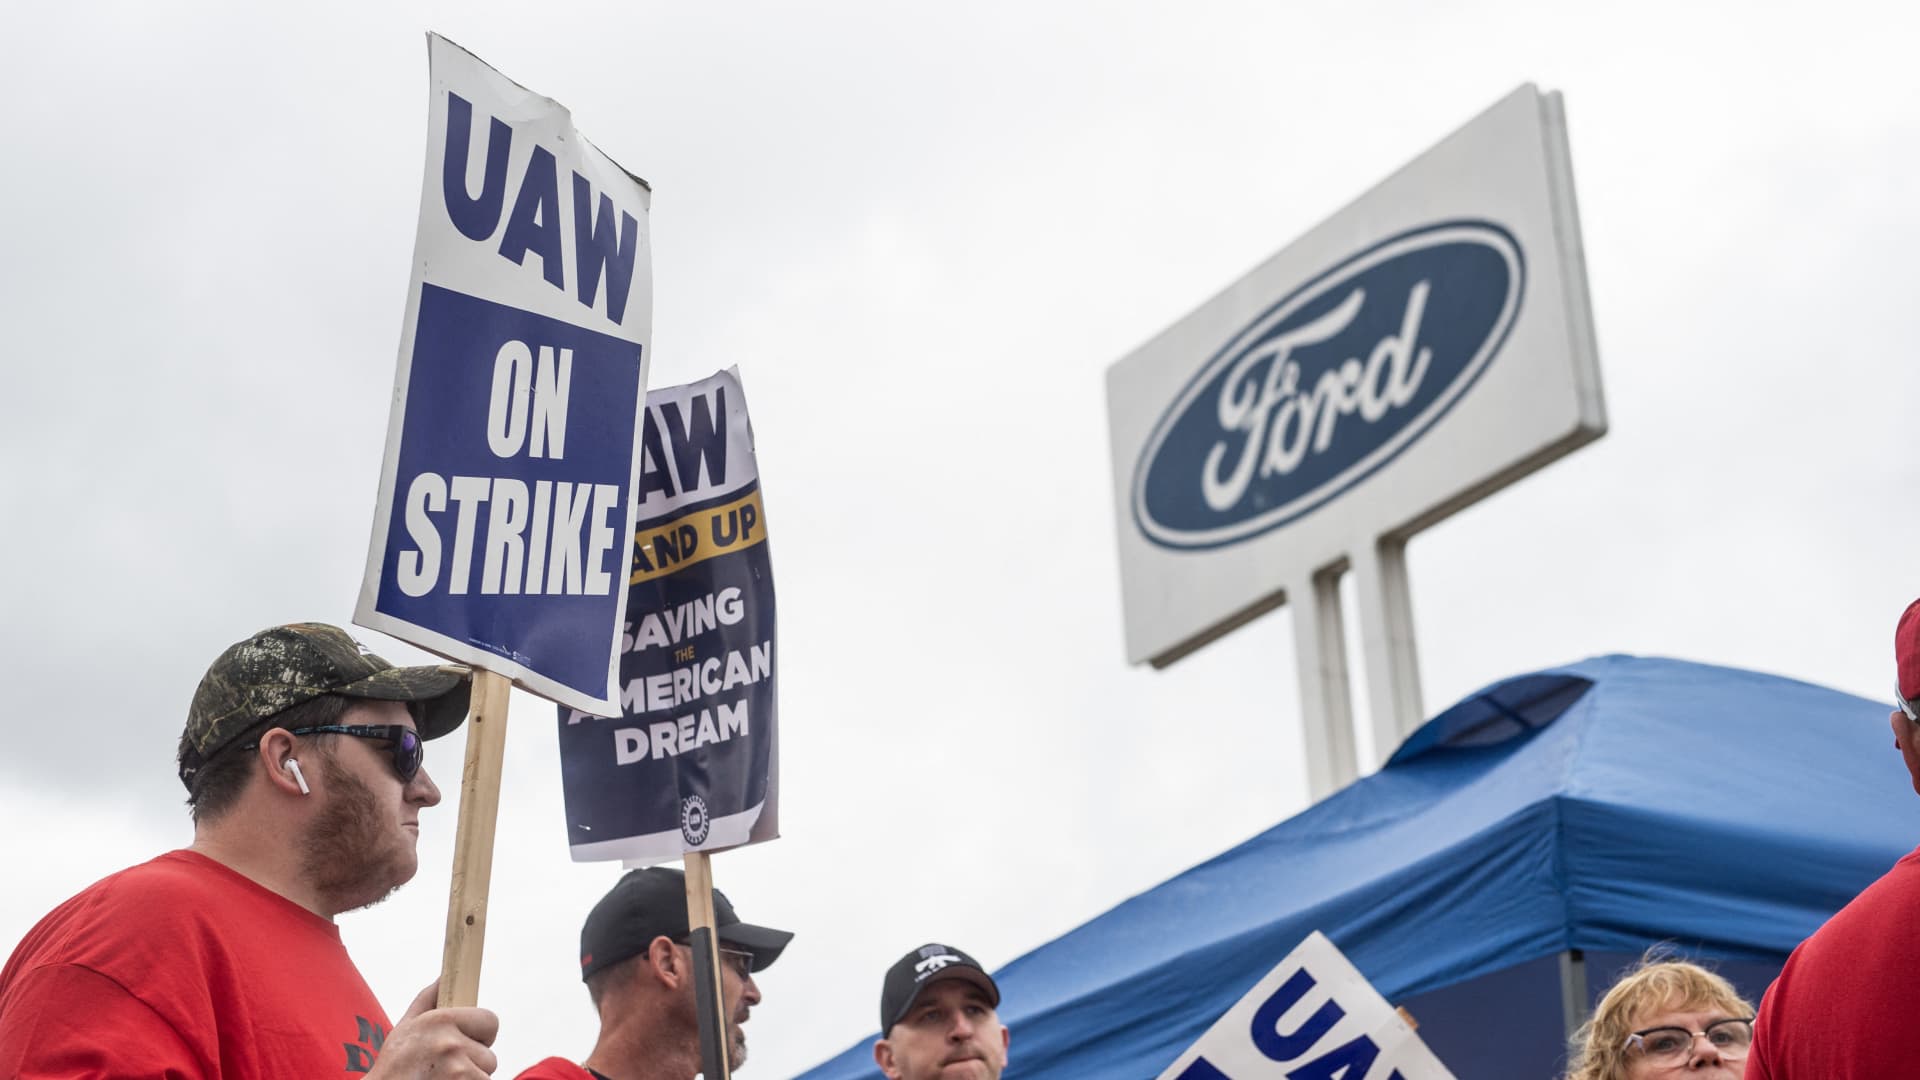 Ford CEO says UAW is ‘holding the deal hostage’ over EV battery vegetation